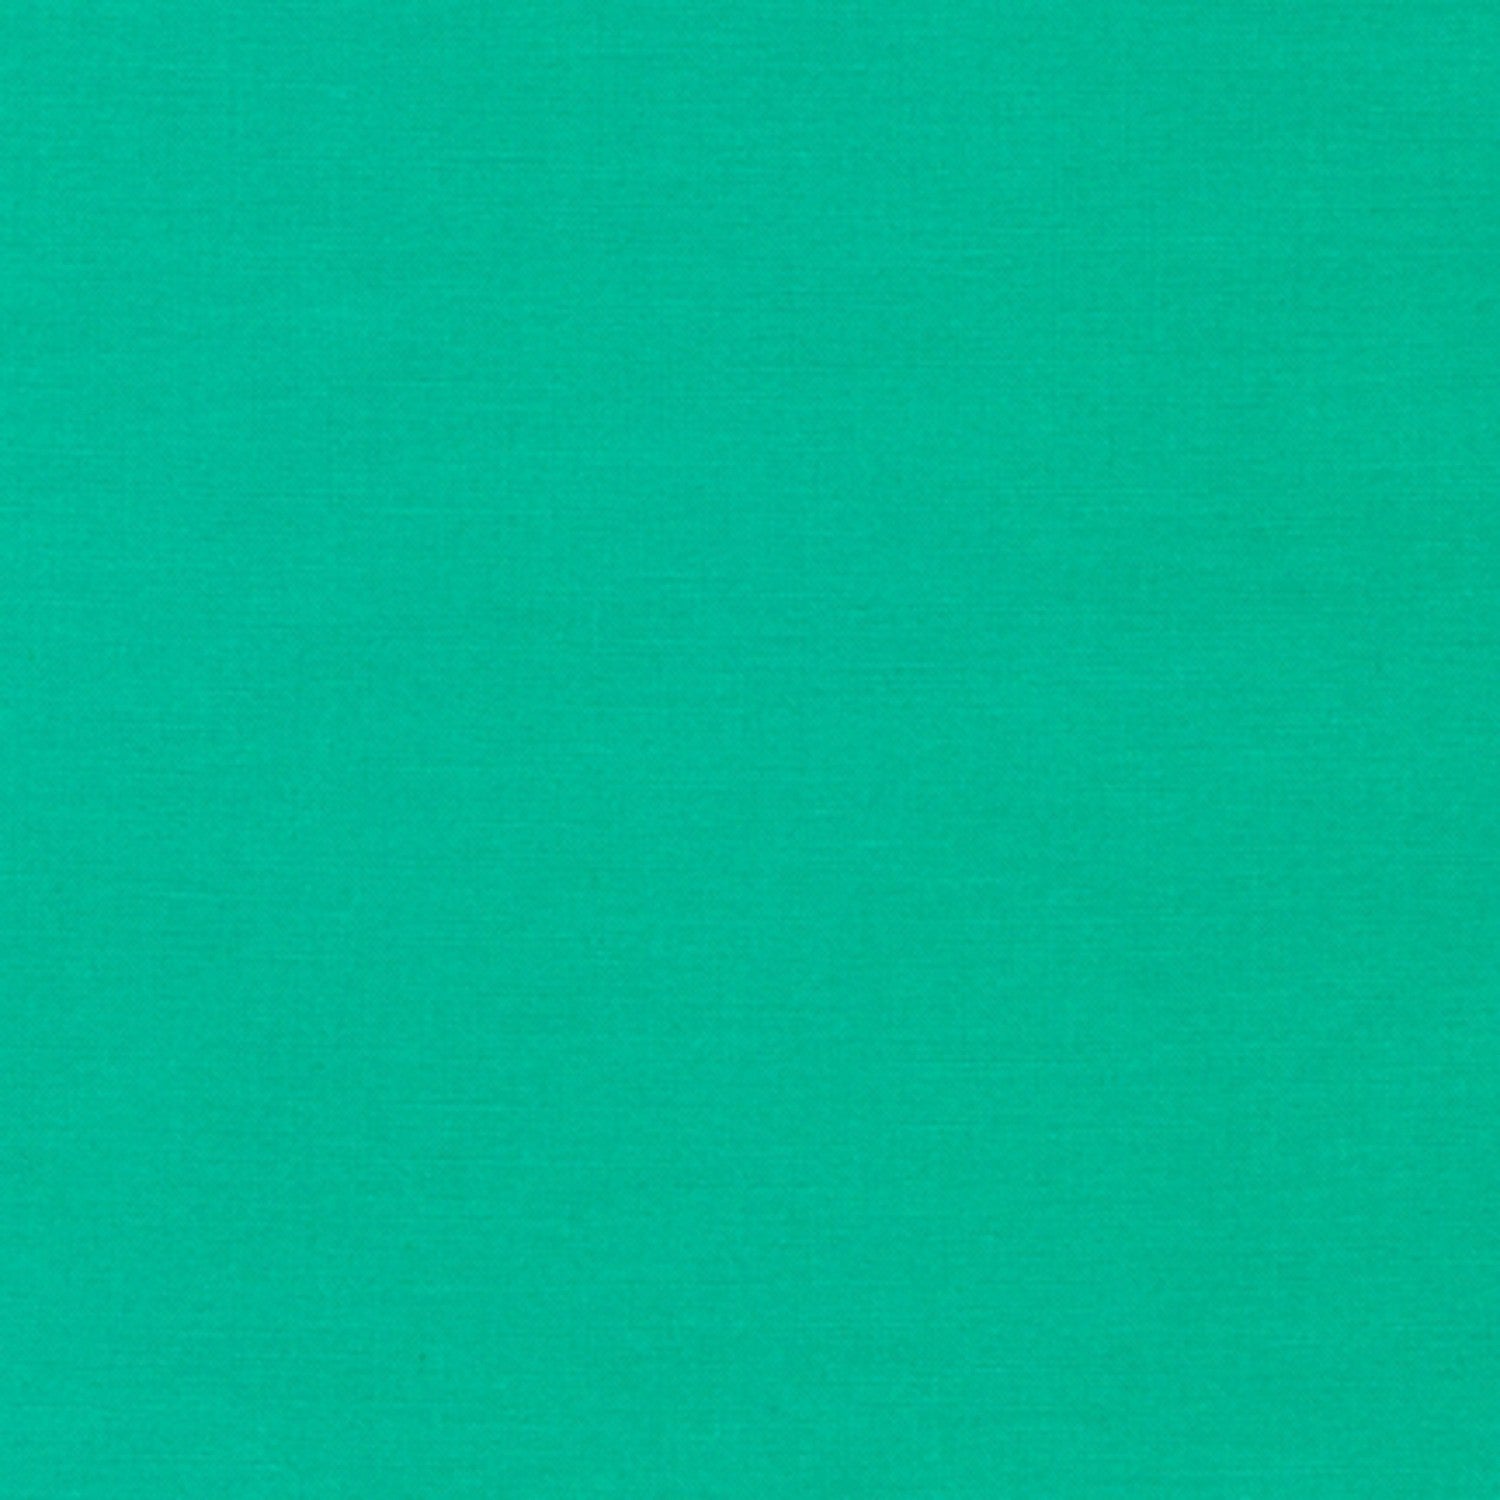 Kona Cotton Solids Kale fabric thumbnail image for true color reference